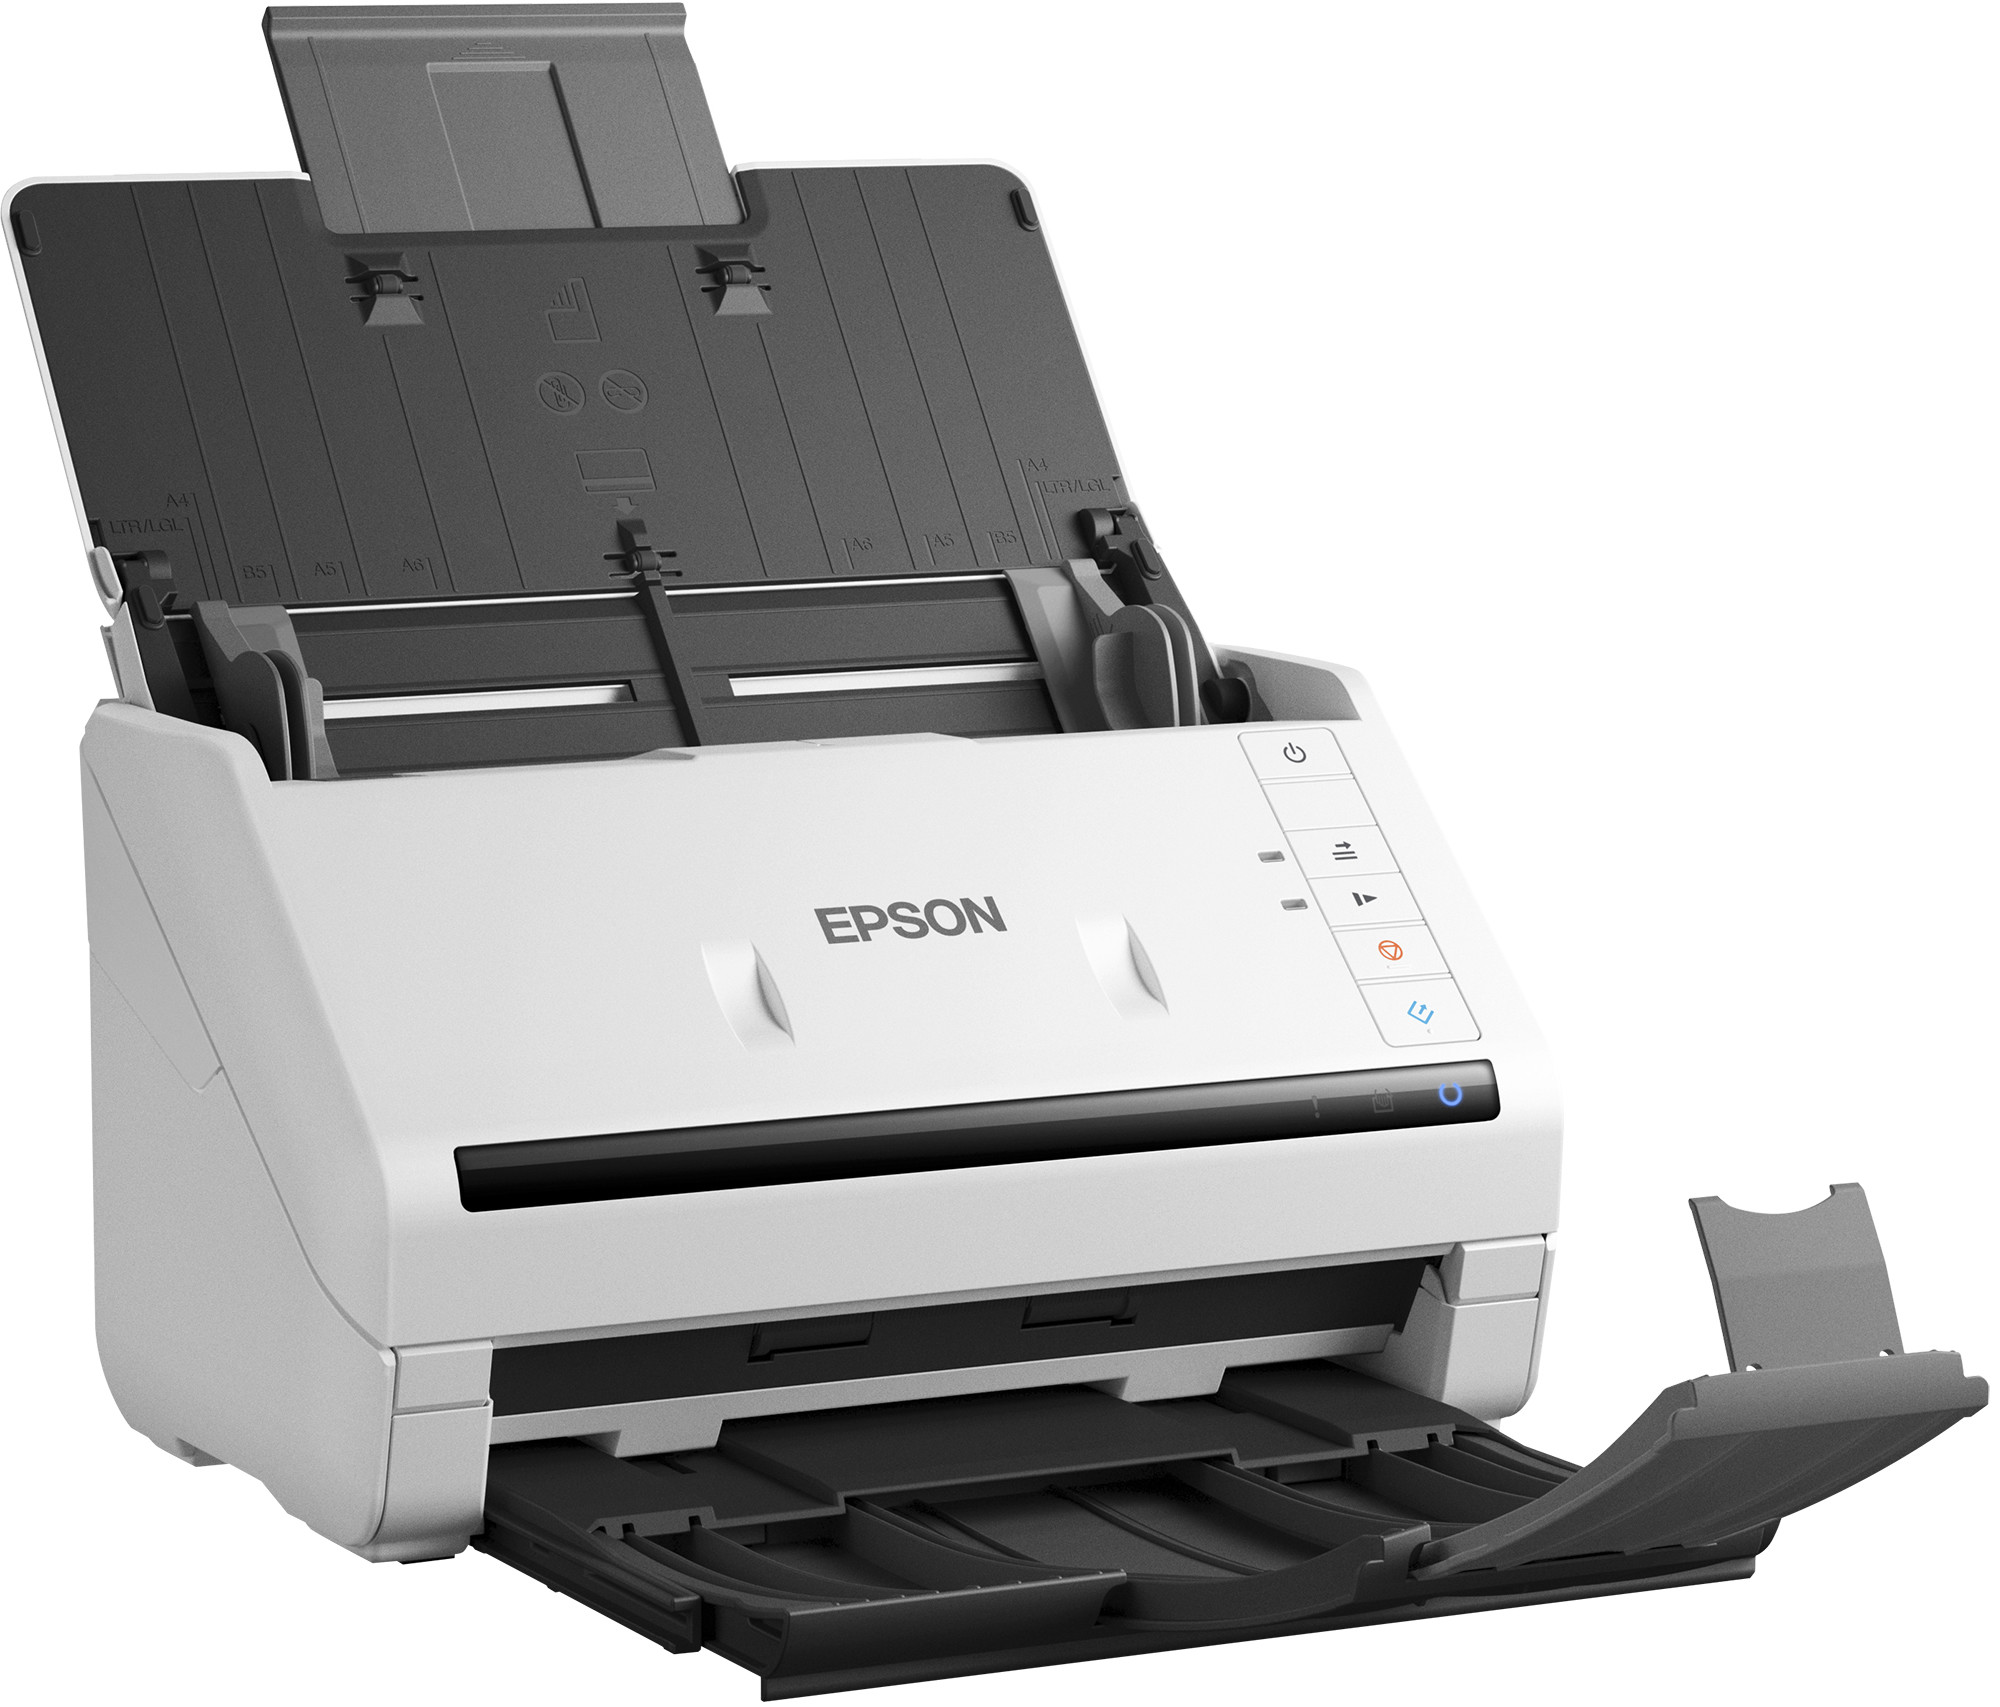 Epson WorkForce DS-570W - Trade Scanners